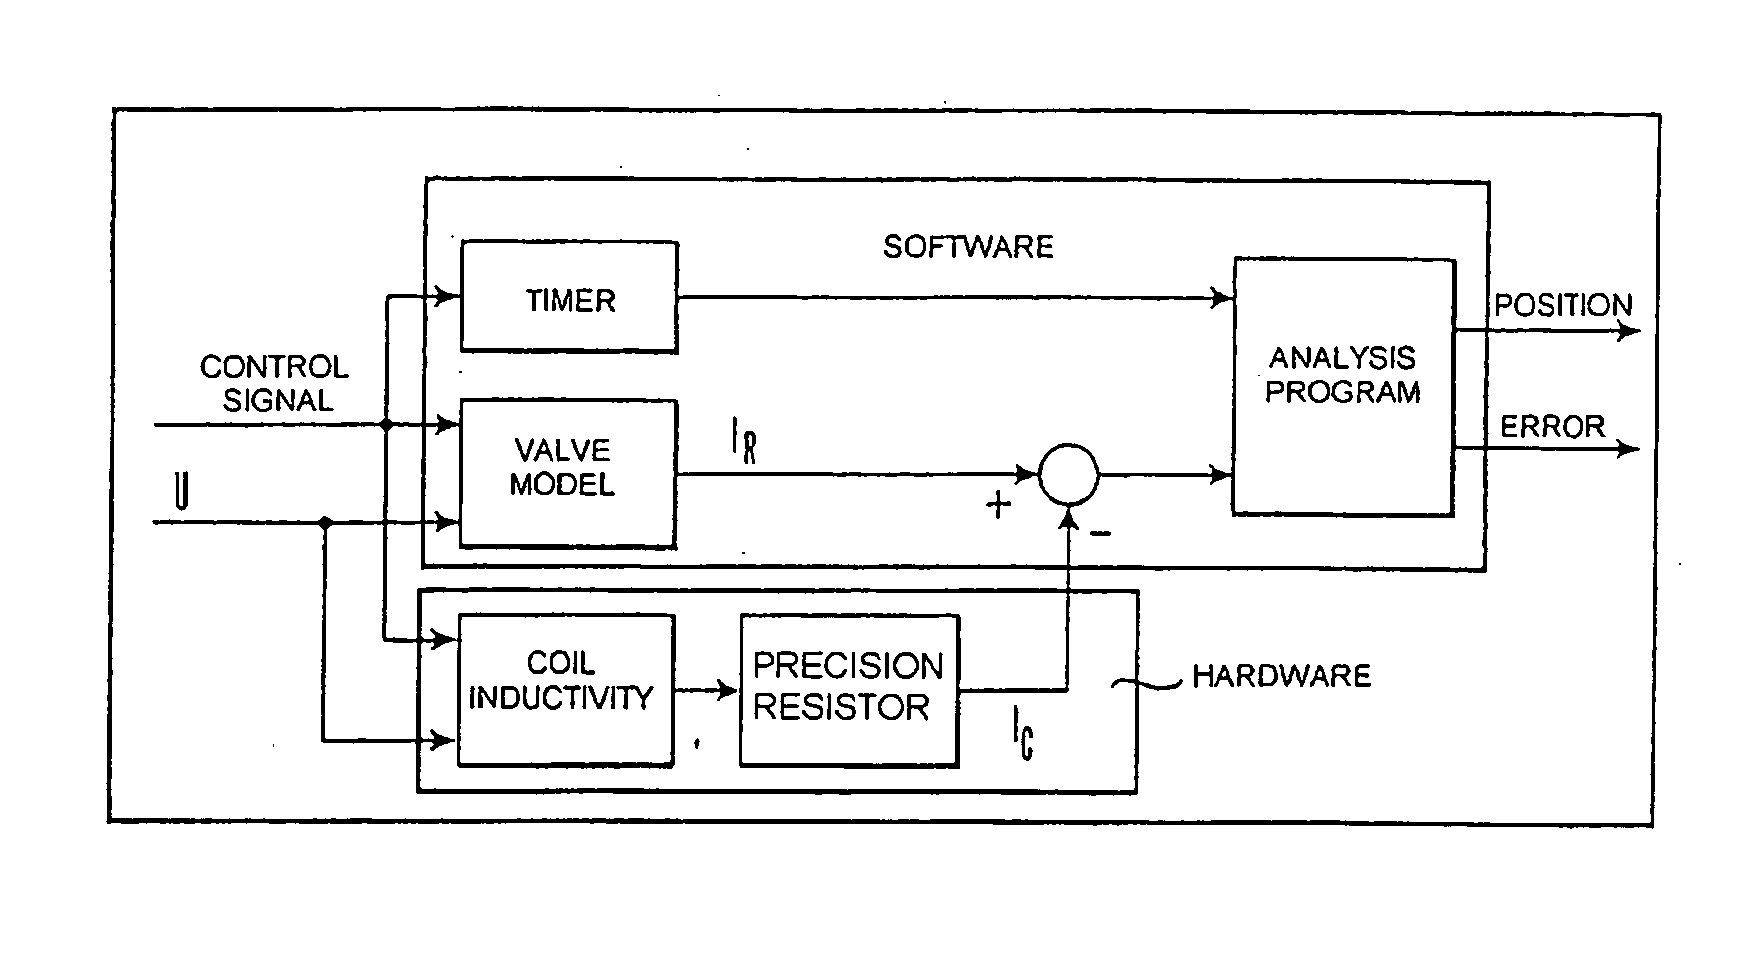 Method for determining the position of a slider in an electromechanical valve